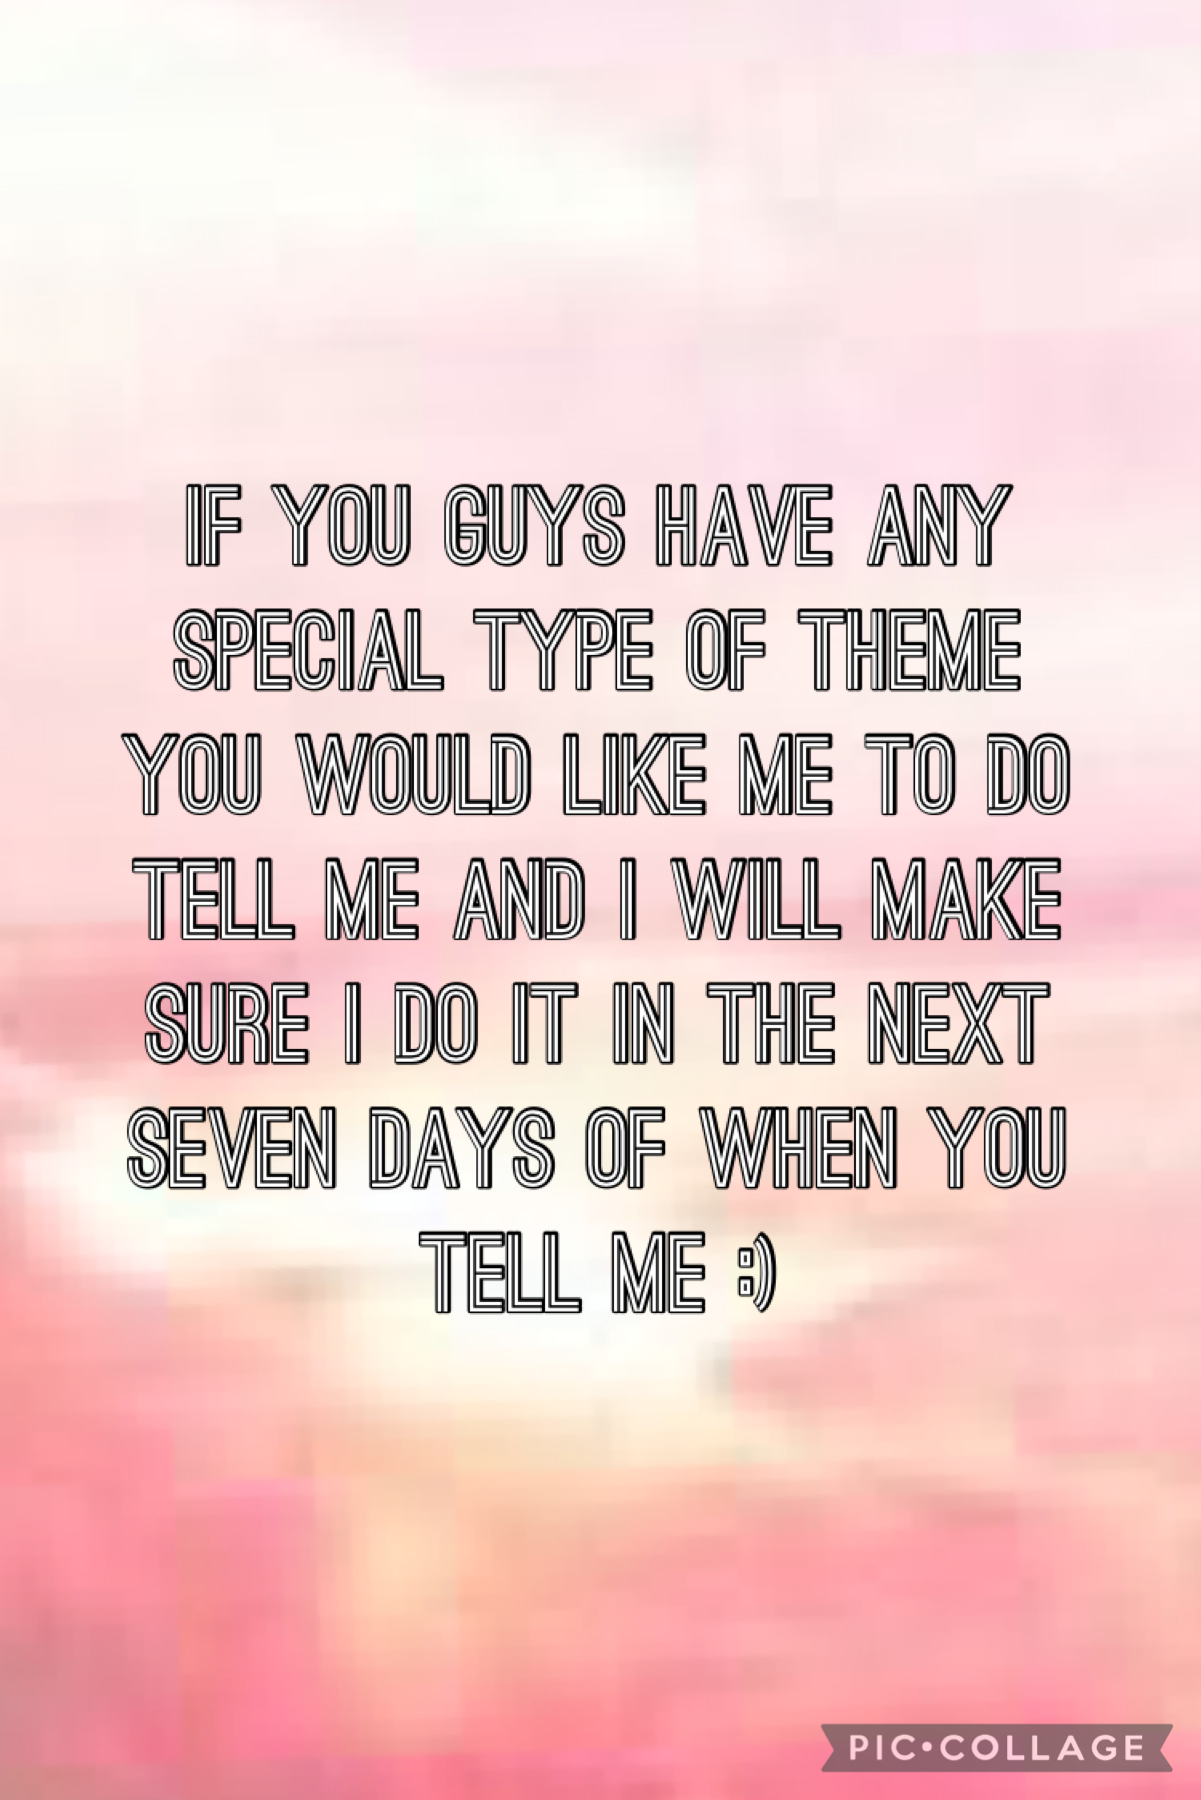 Tell me and you will receive :)